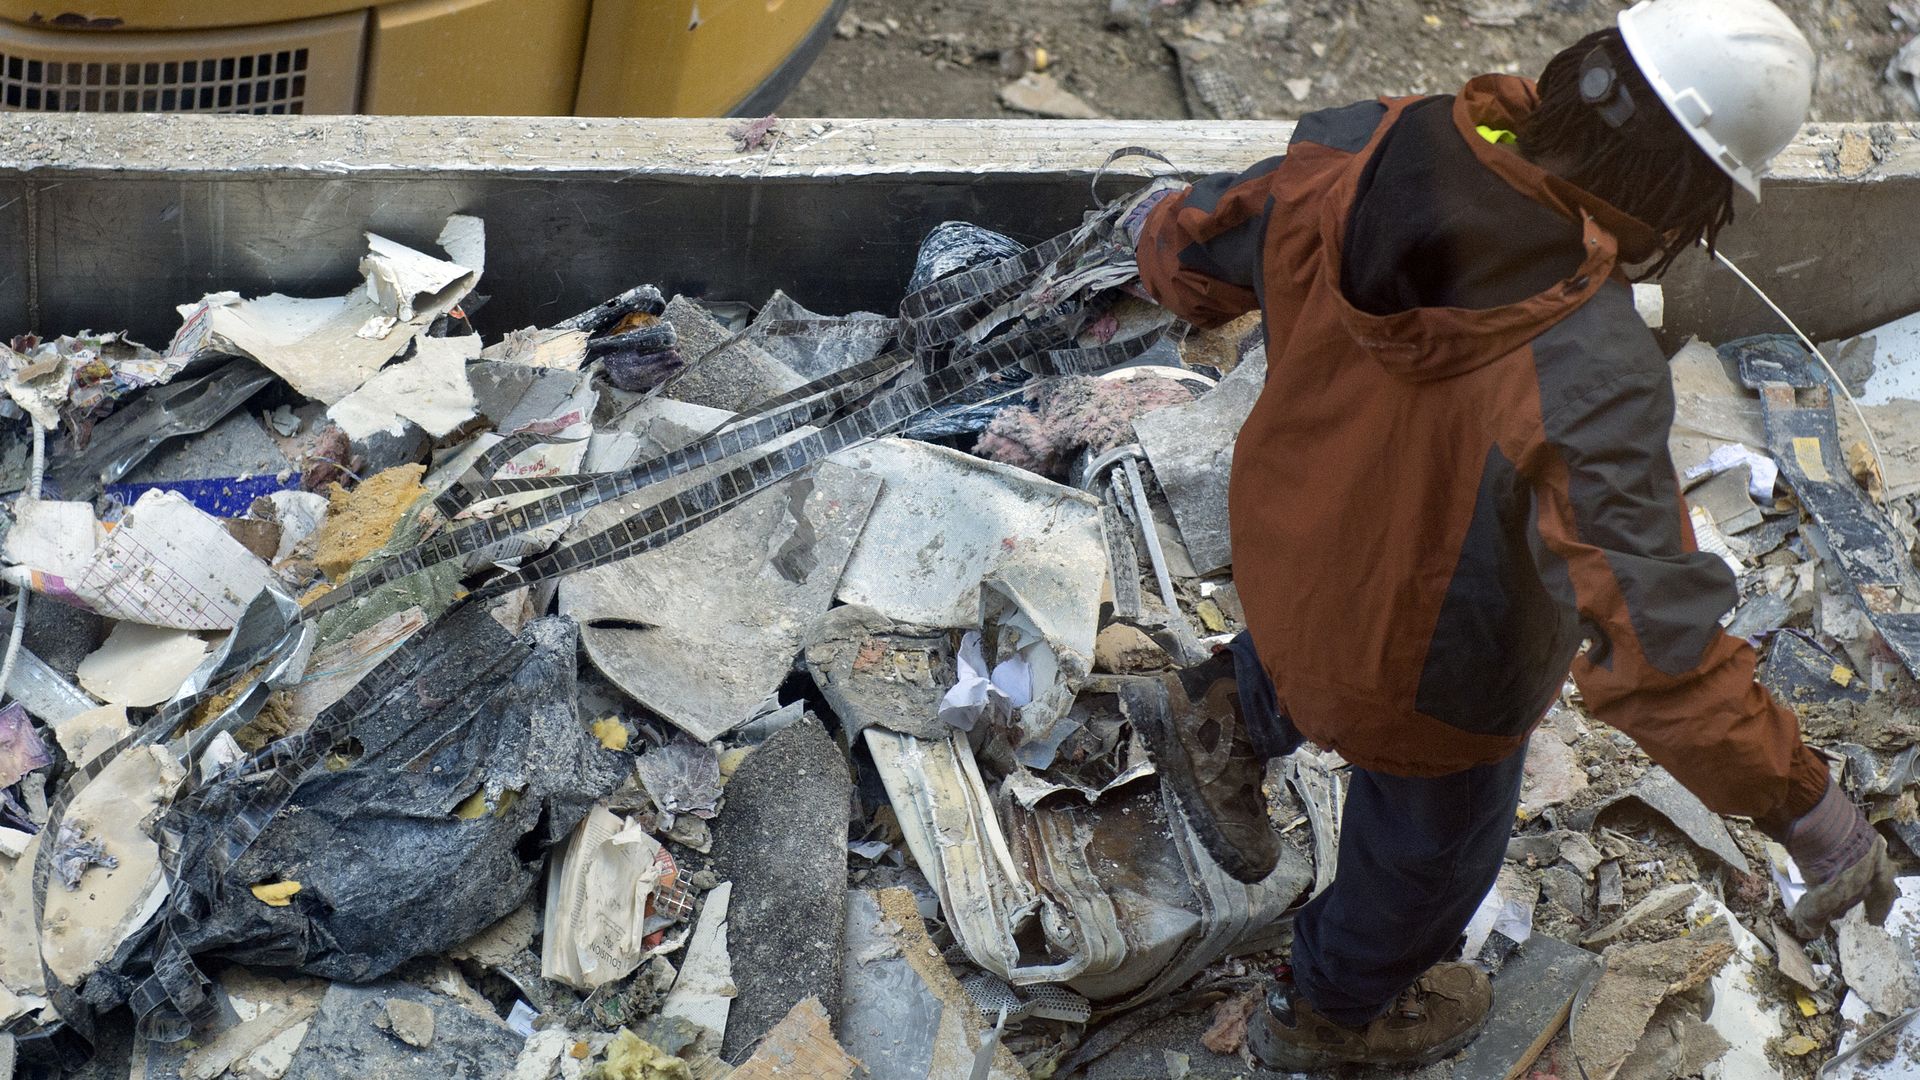 A worker sifts through trash in a dumpster in Washington